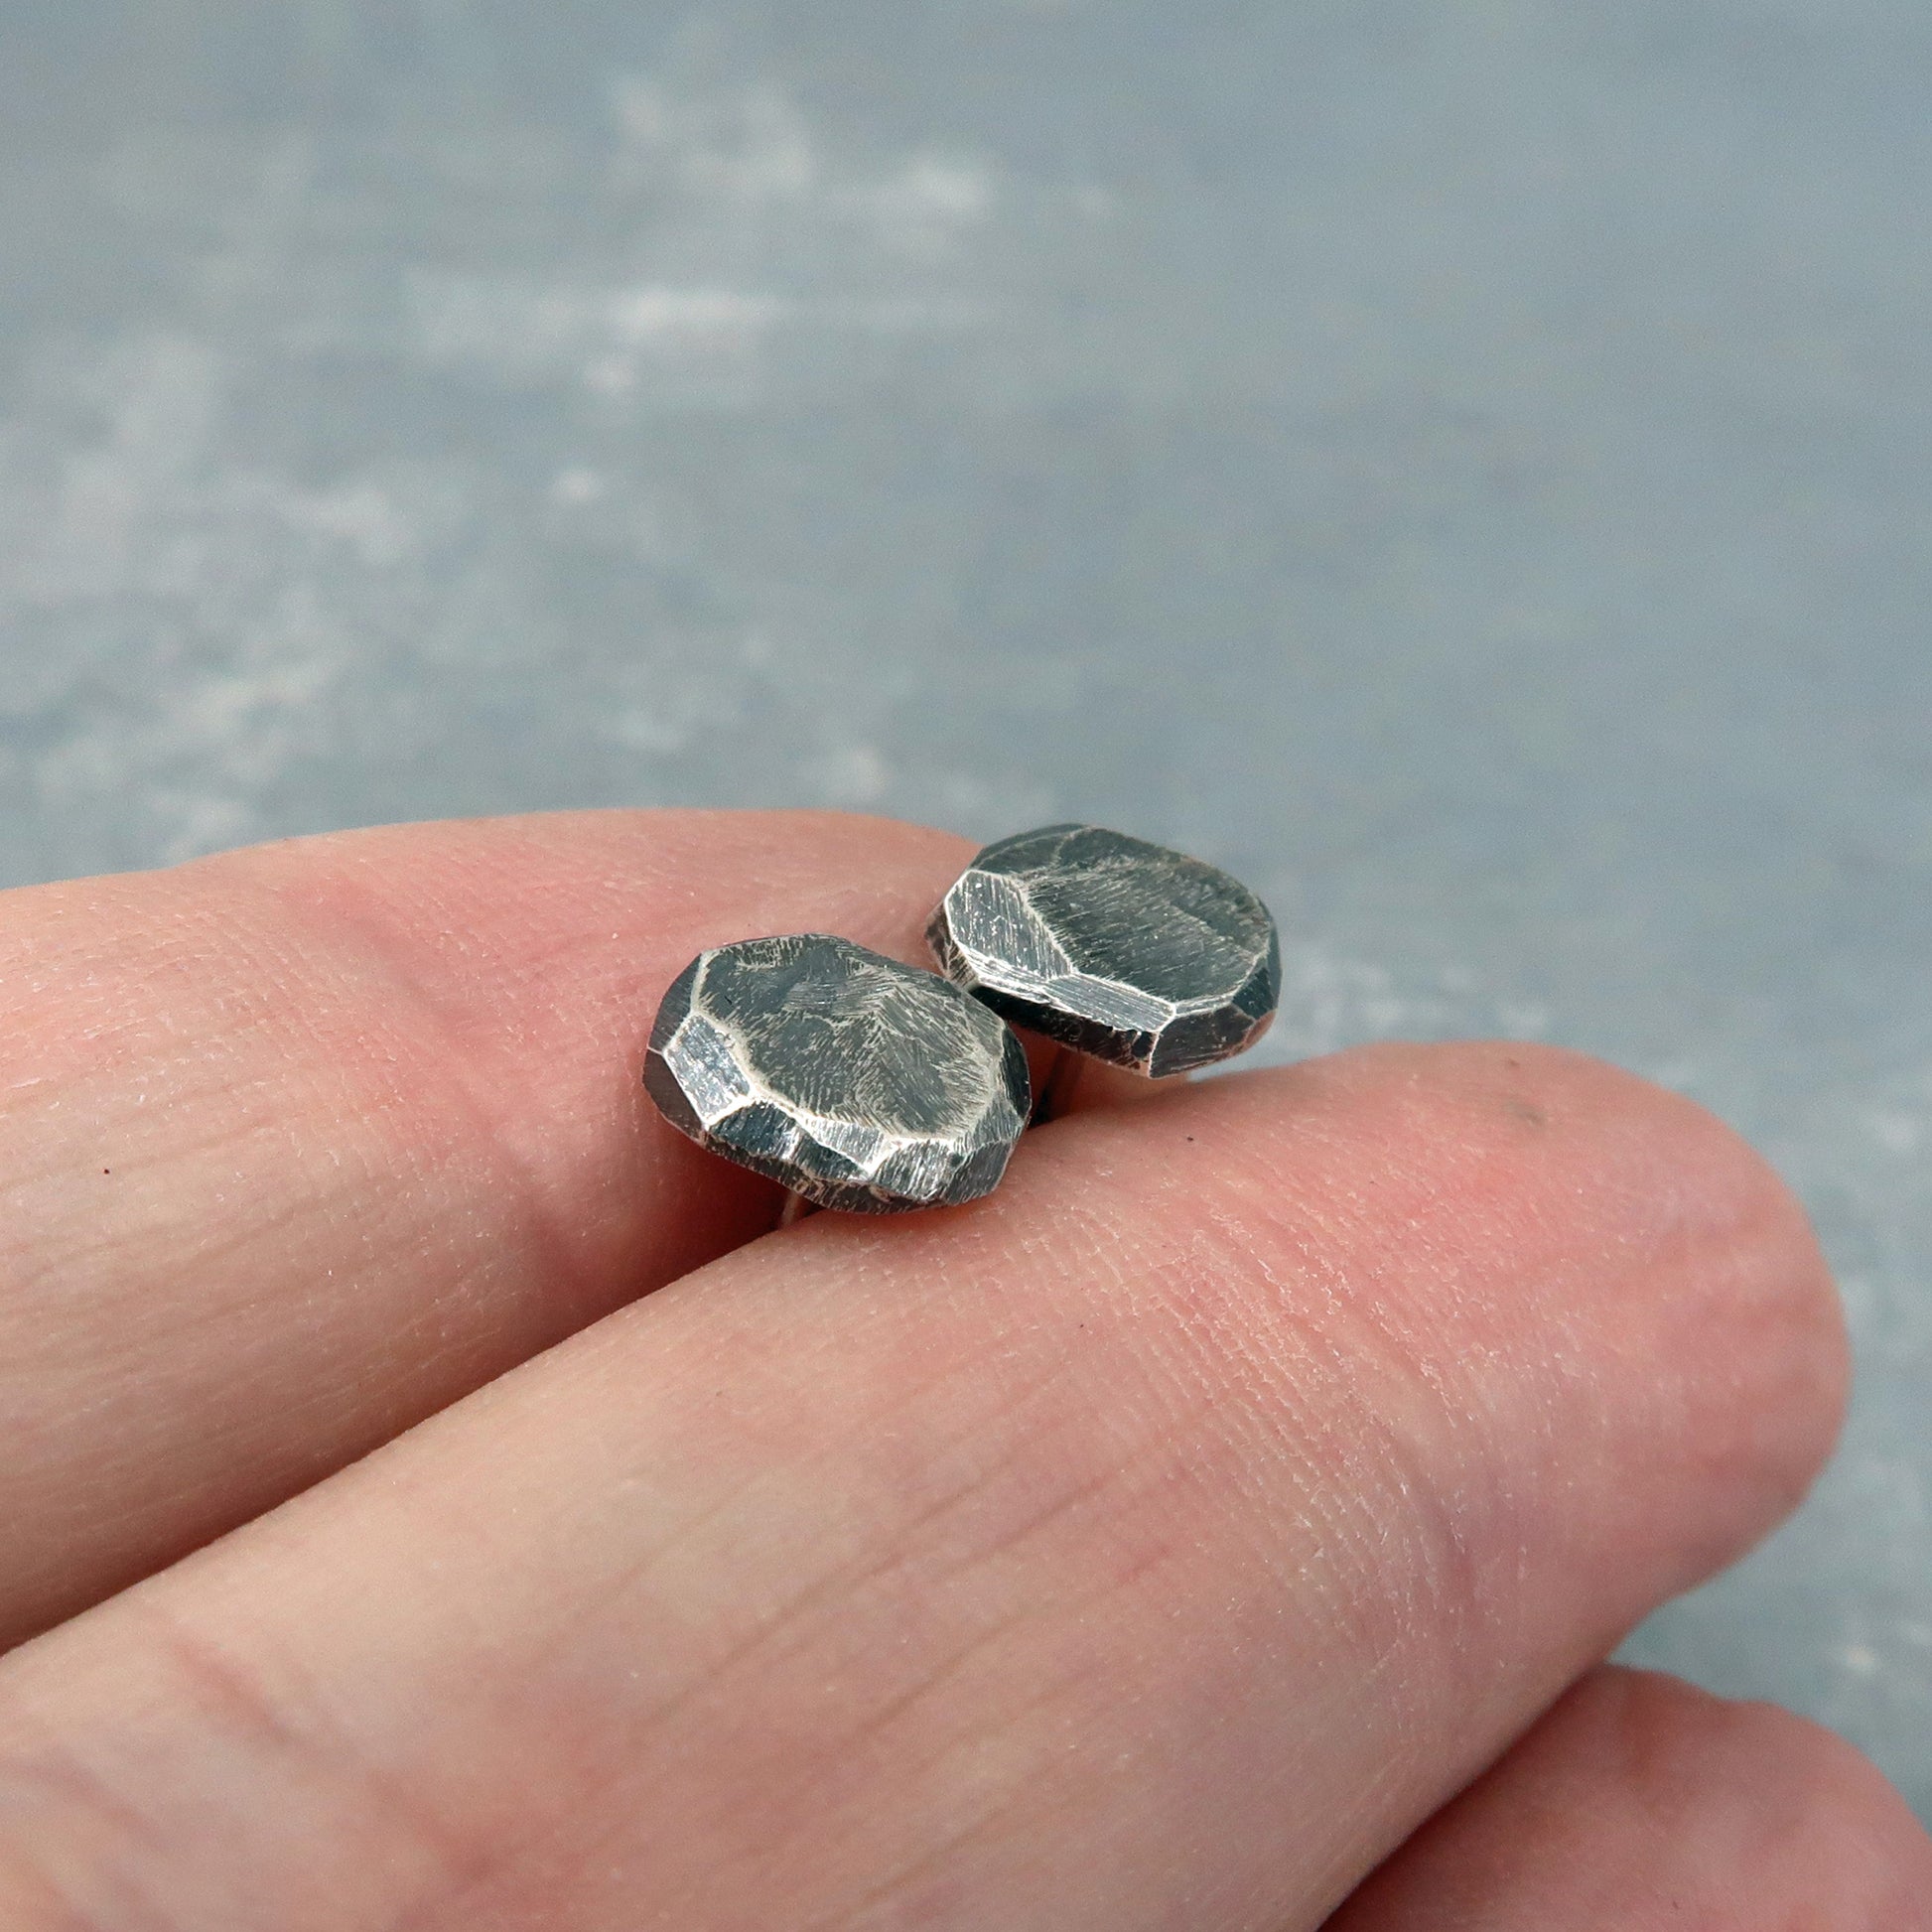 Rustic sterling silver studs shown on hand